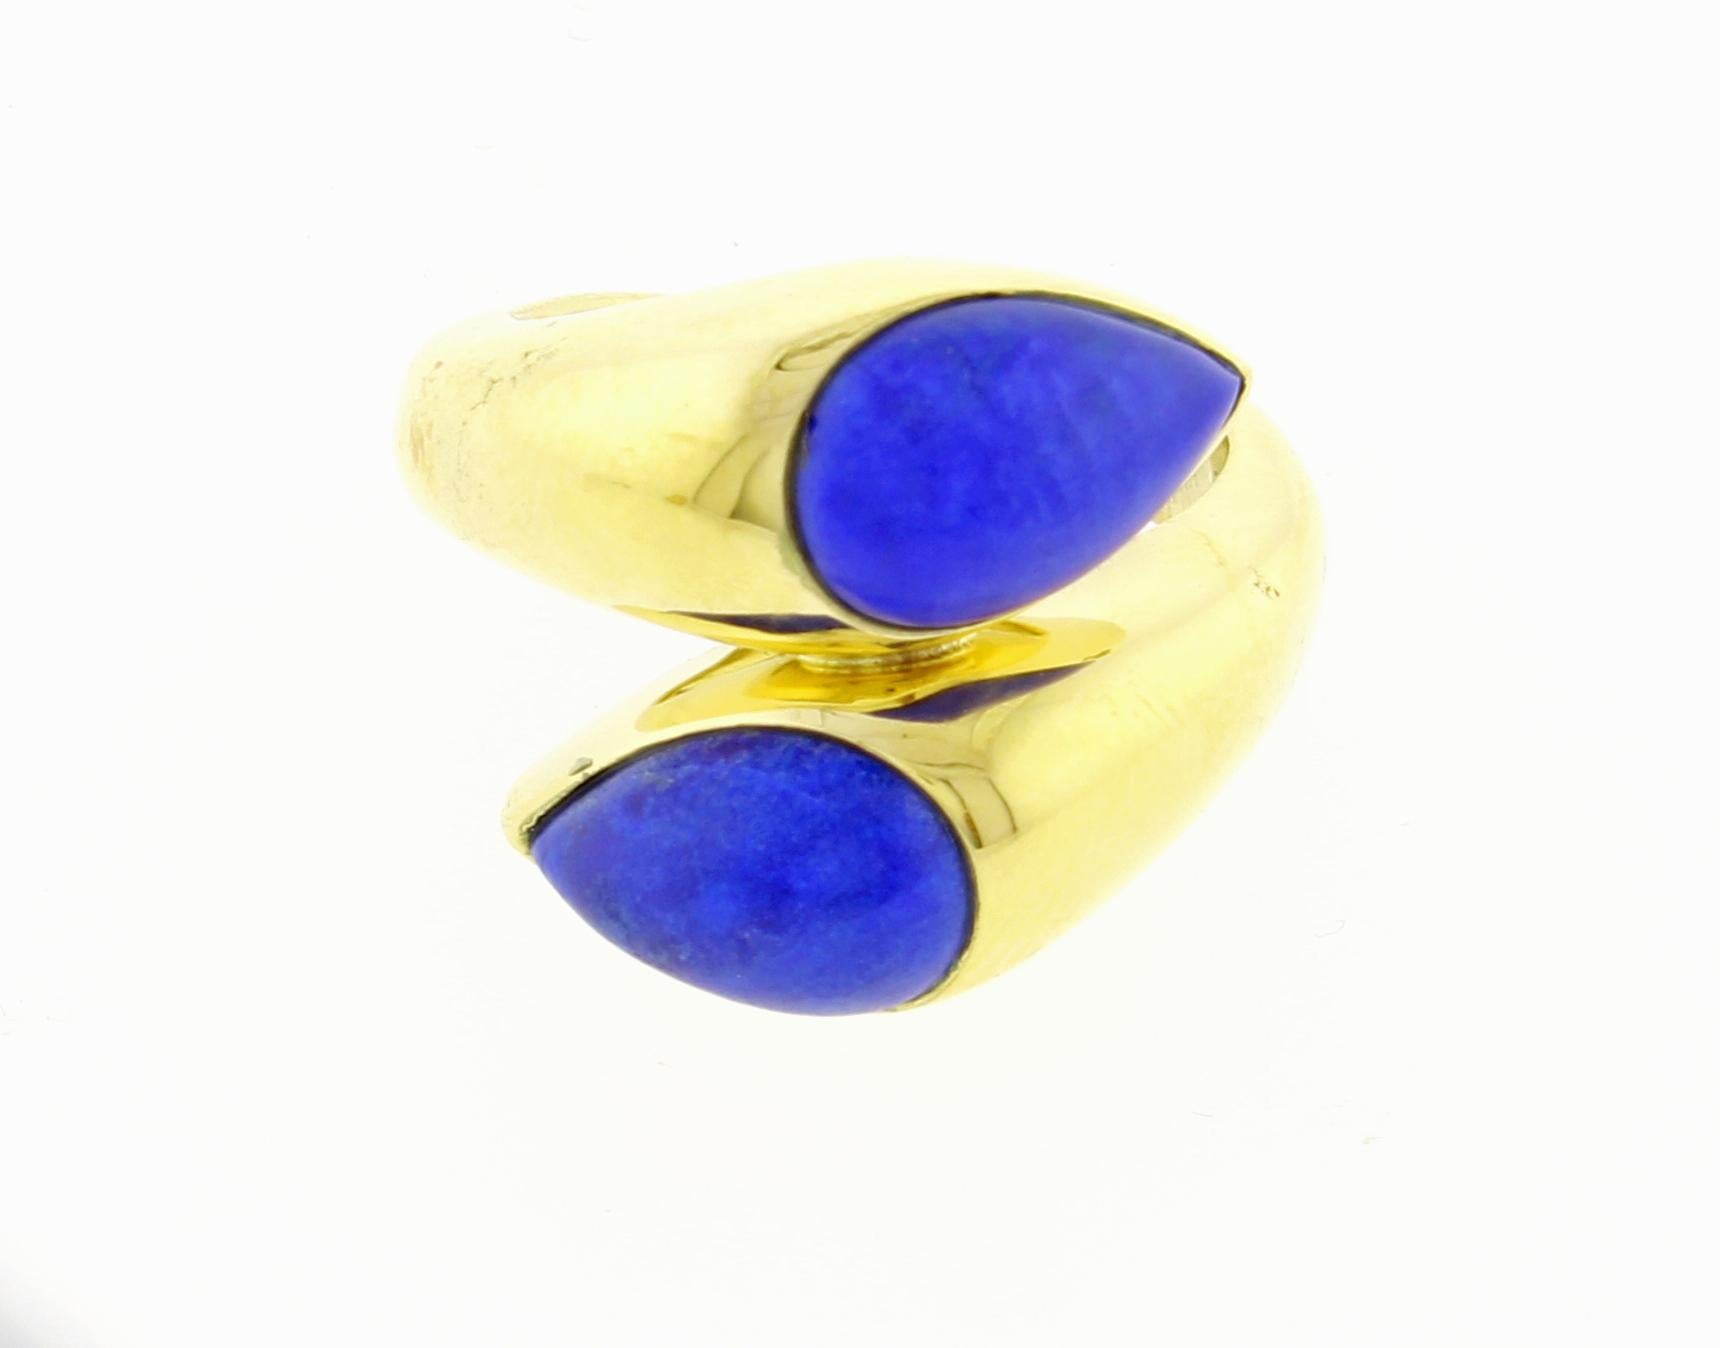 From Van Cleef & Arpels a twin pear shape Lapis ring. Signed  VCA NY
♦ Designer: Van Cleef & Arpels
♦ Metal: 18 karat
♦  Lapis Lazuli 11 X 7.5mm
♦ Circa 1975
♦ Size 5, 
♦ Packaging: Pampillonia presentation box 
♦ Condition: Excellent , pre-owned
♦